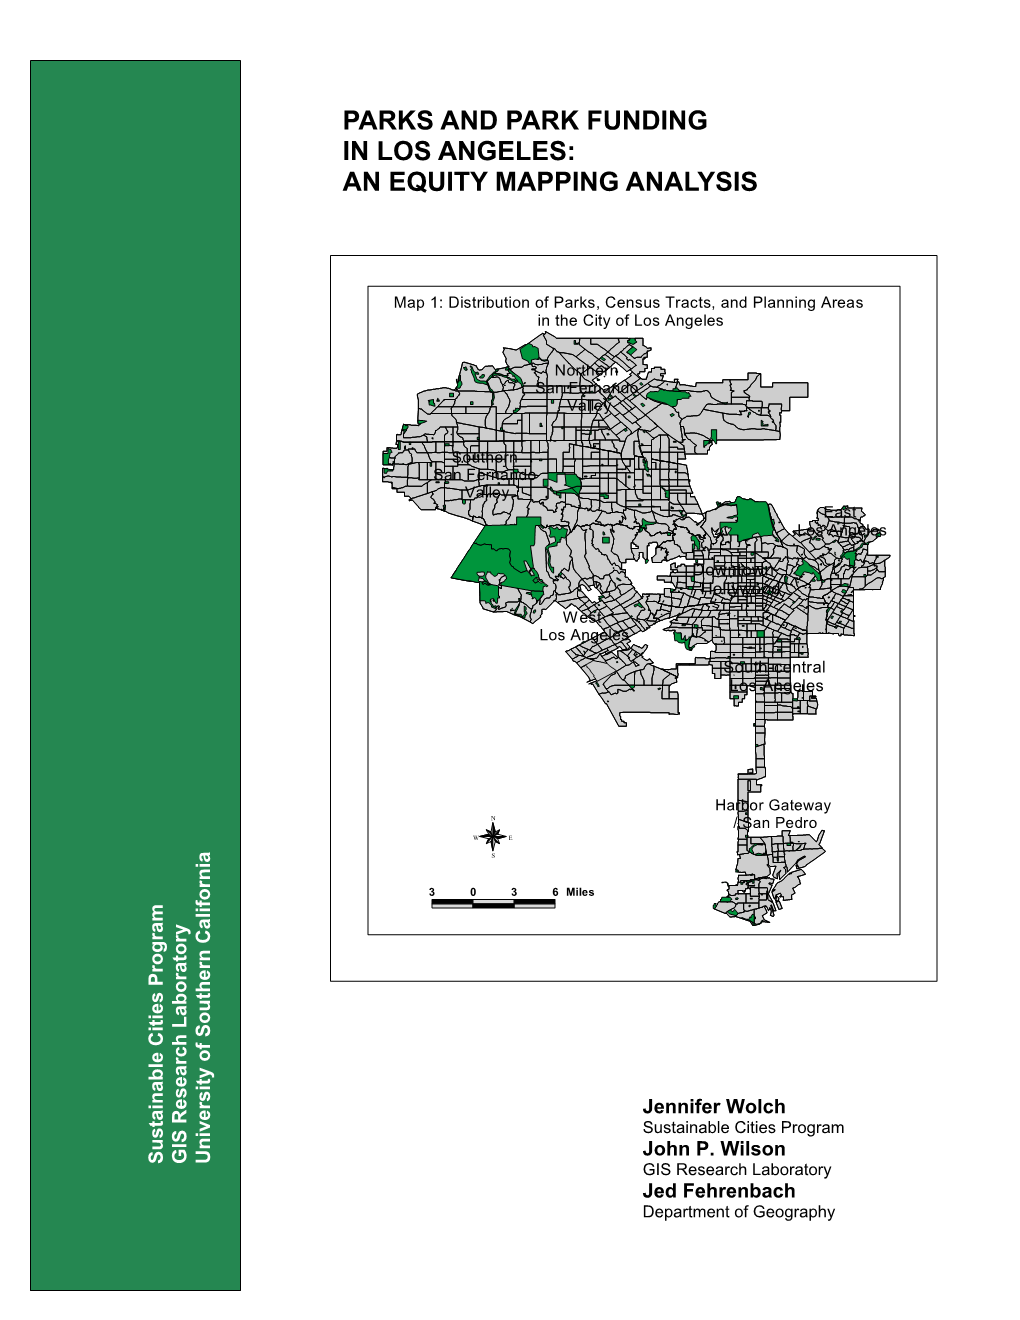 Parks and Park Funding in Los Angeles: an Equity Mapping Analysis